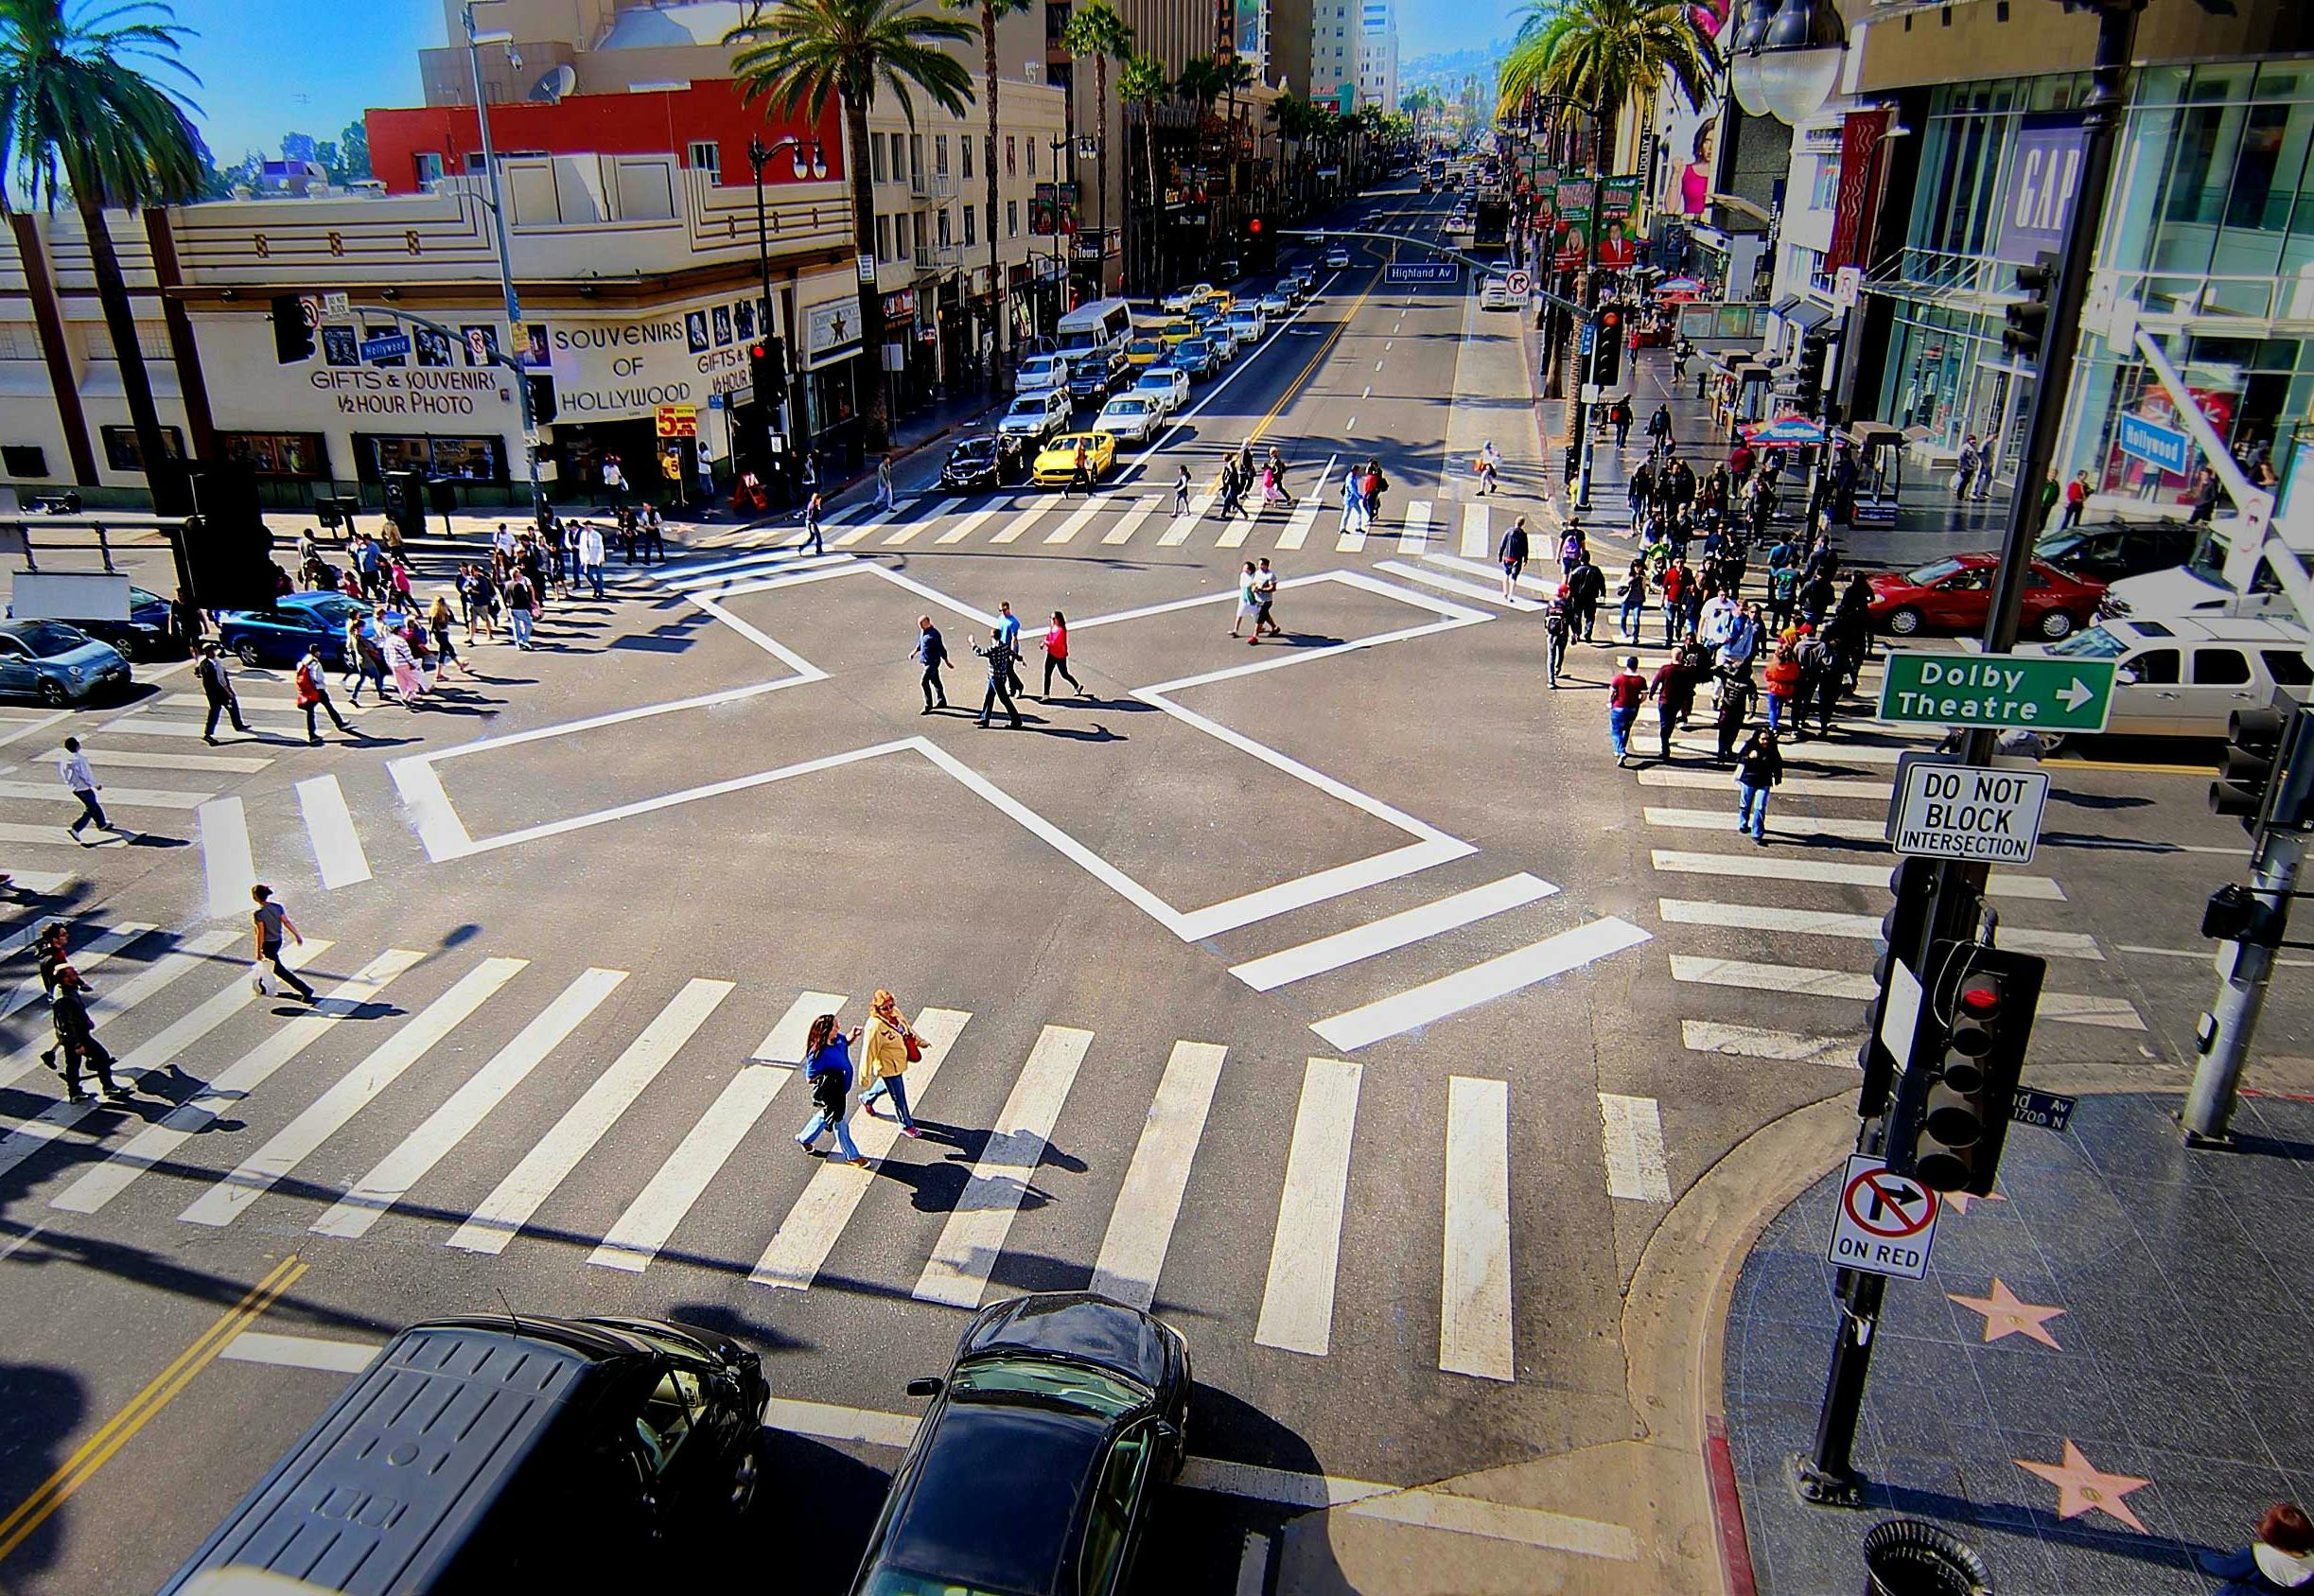 A Fourway intersection and crosswalk